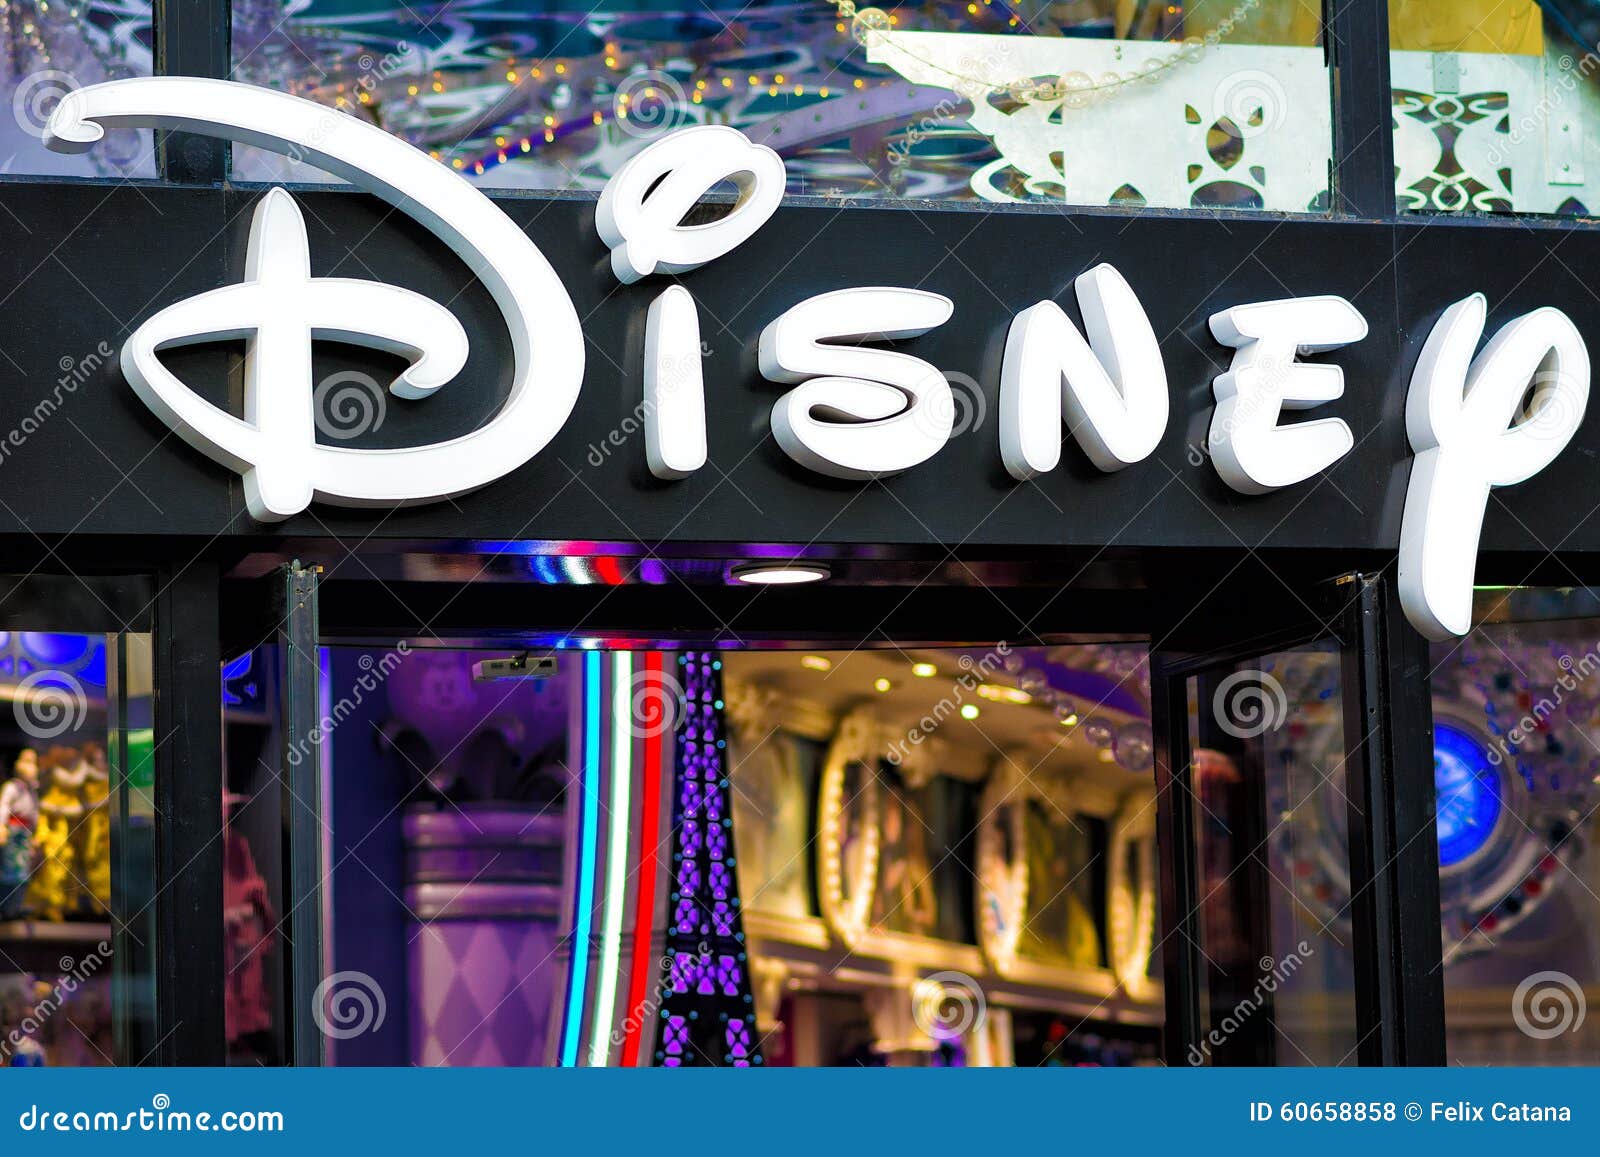 Disney Store in Paris editorial stock photo. Image of letters - 60658858